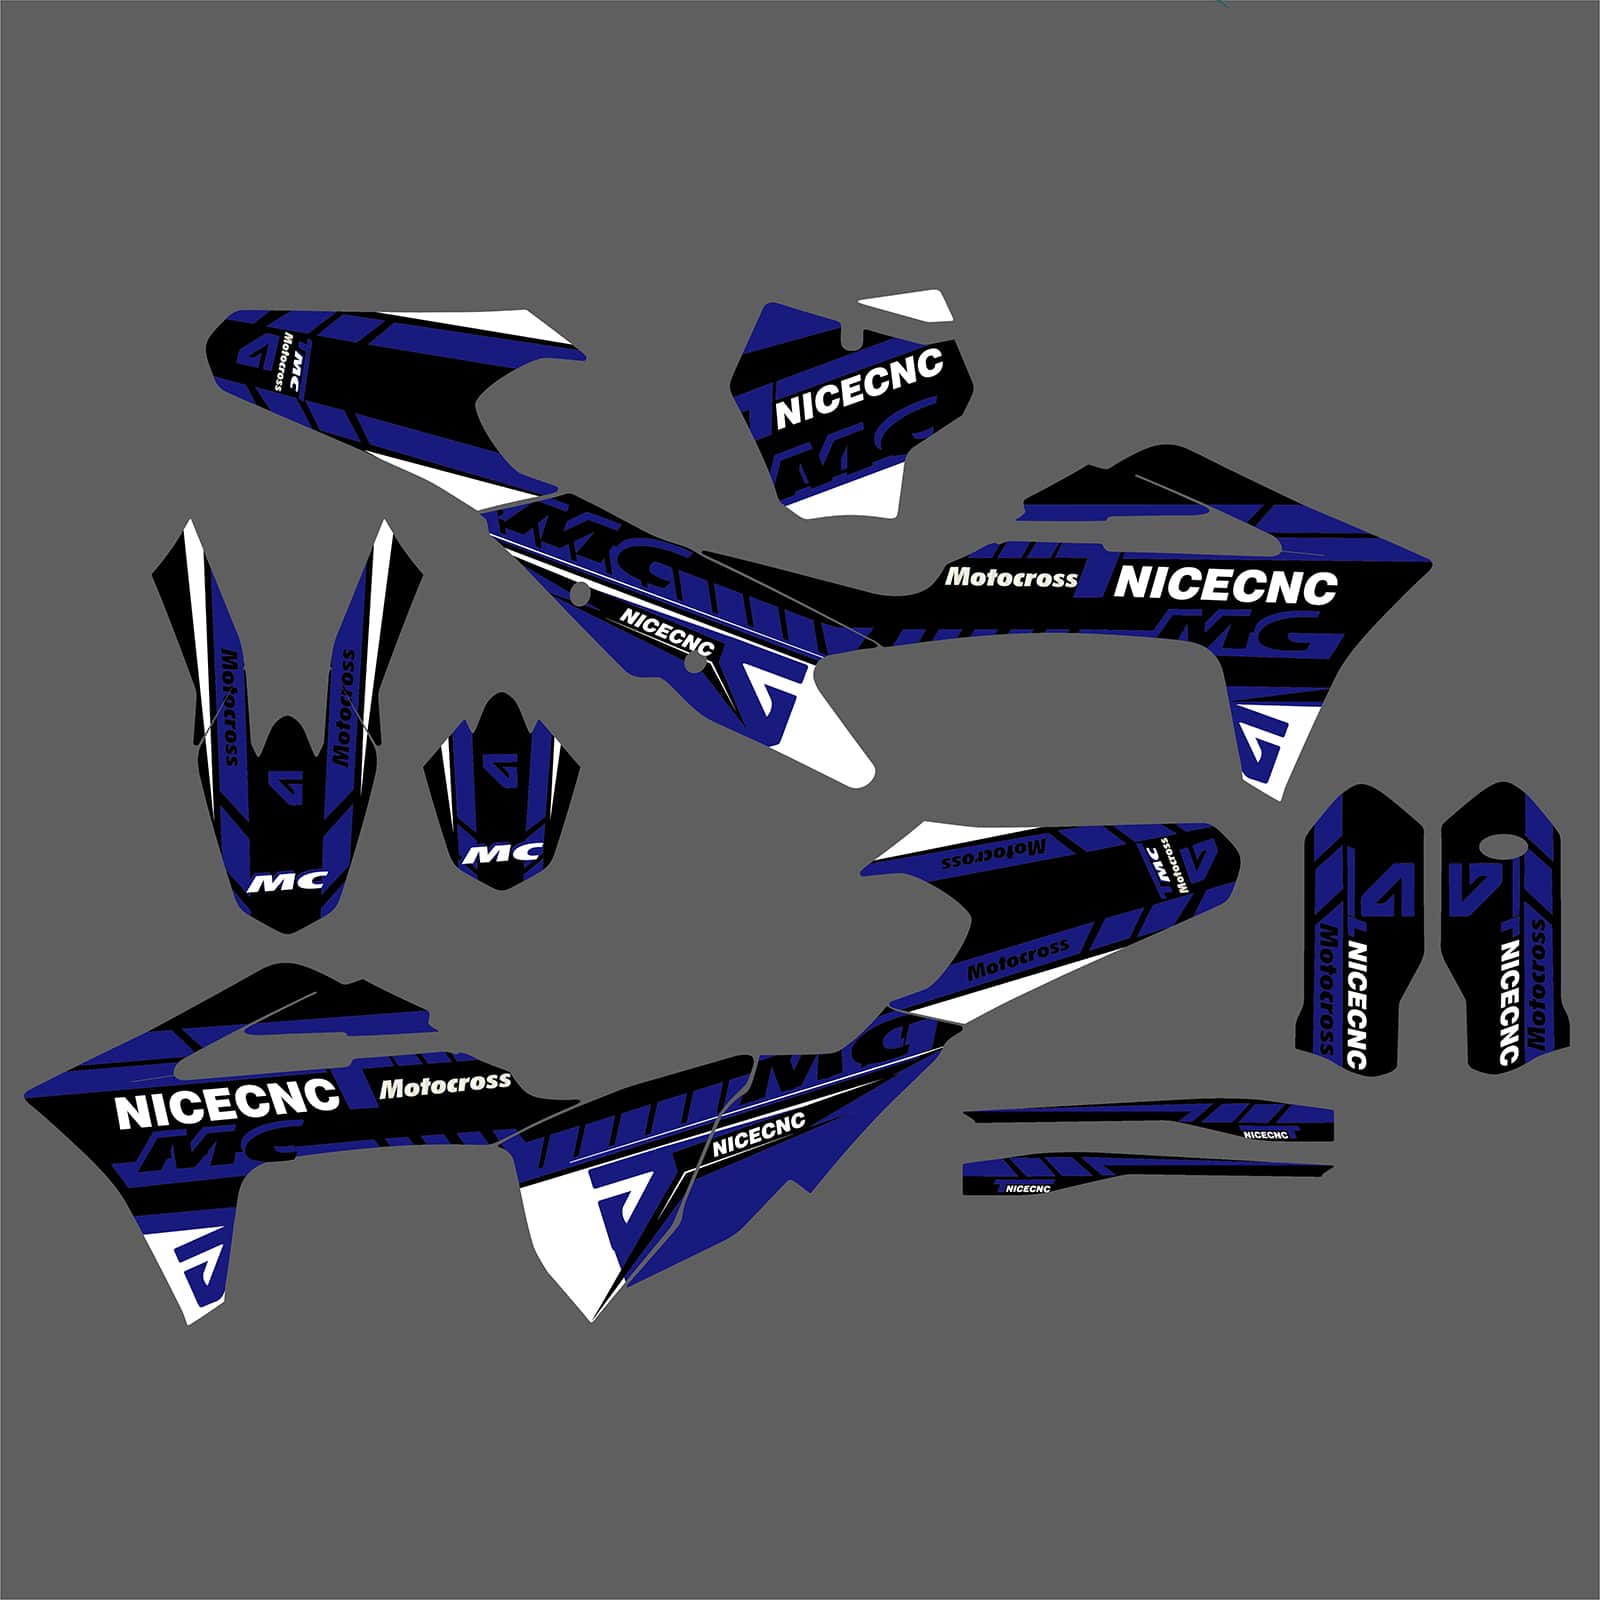 Motorcycle Team Full Graphics Background Sticker Decal Kits For GAS GAS MC Motocross All Models 2021-2023